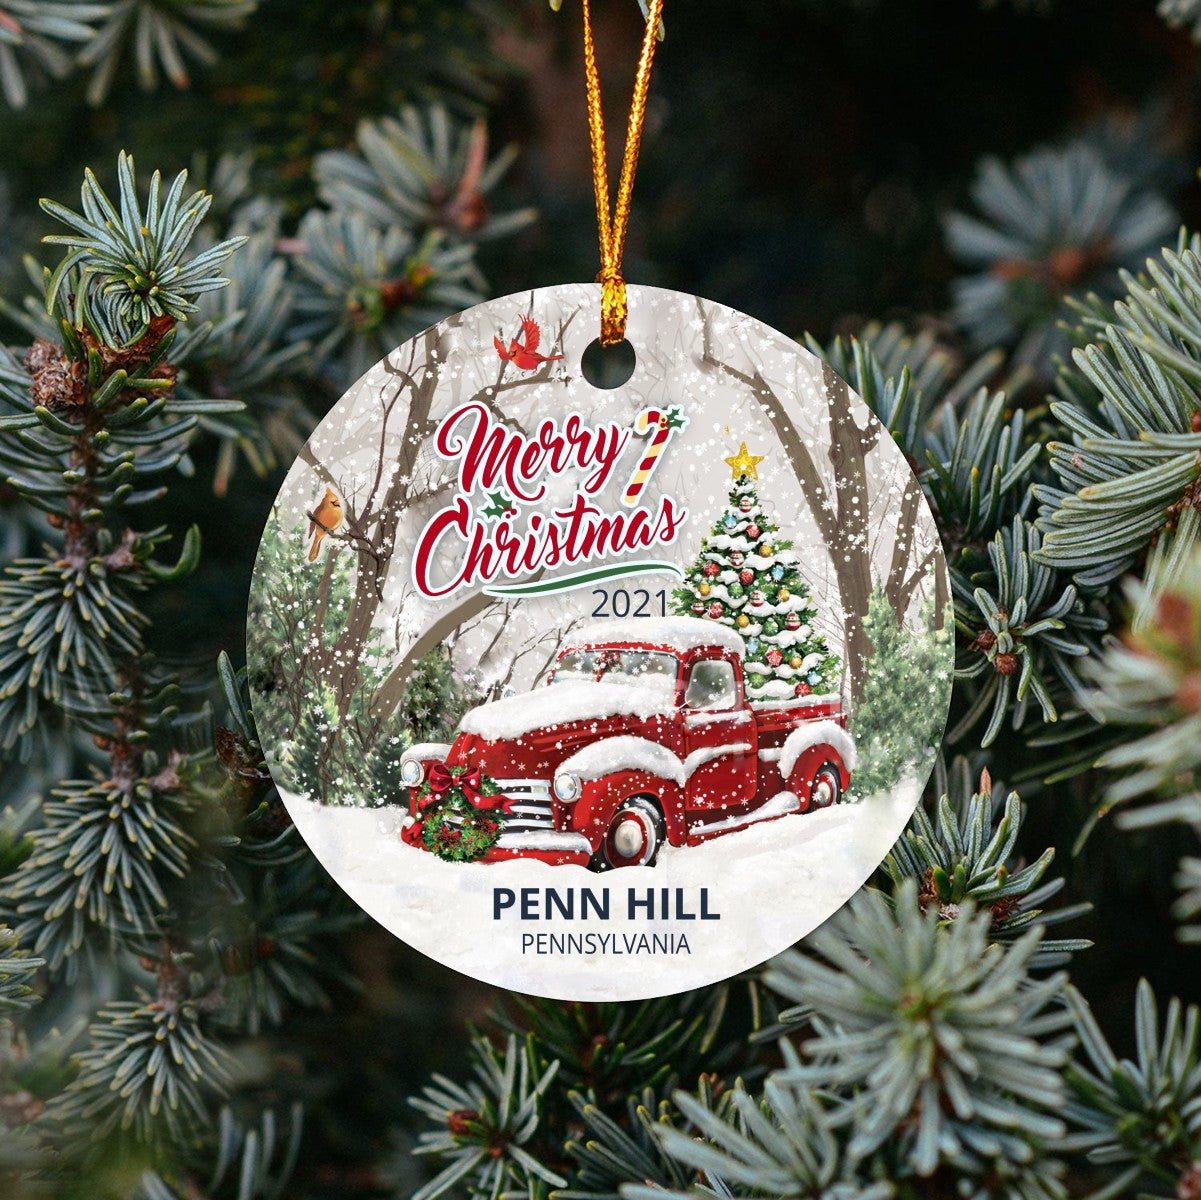 Christmas Tree Ornaments Penn Hill - Ornament With Name City, State Penn Hill Pennsylvania PA Ornament - Red Truck Xmas Ornaments 3'' Plastic Gift For Family, Friend And Housewarming